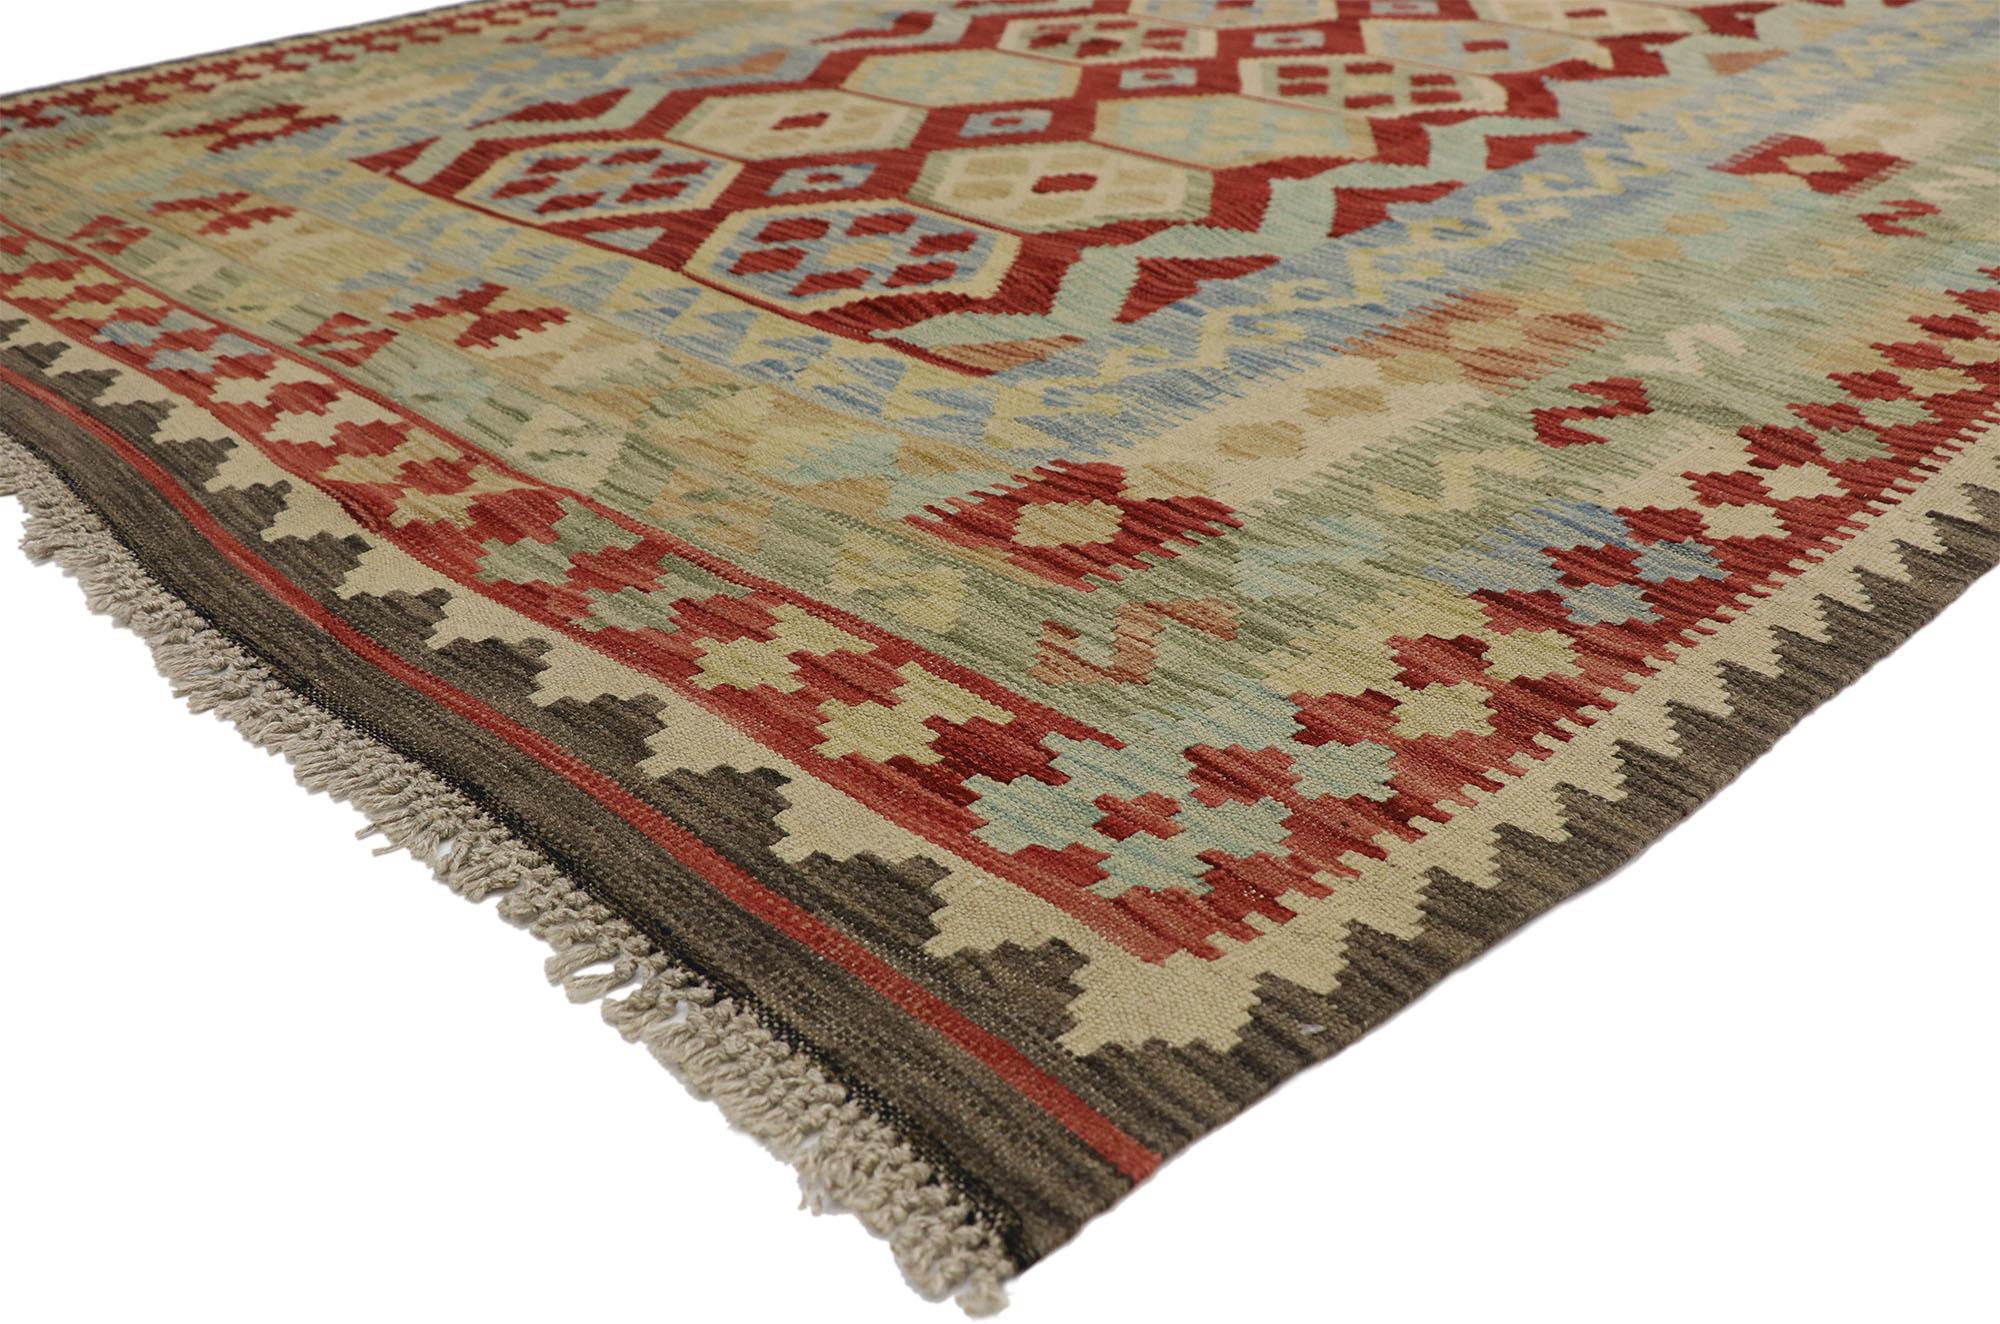 80119 Vintage Afghani Kilim Rug, 06’09 x 09’07. In this handwoven wool vintage Afghan kilim rug, the essence of Southwest Modern style intertwines seamlessly with tribal allure. Bold tribal motifs and vibrant earth-tone hues converge, fashioning a